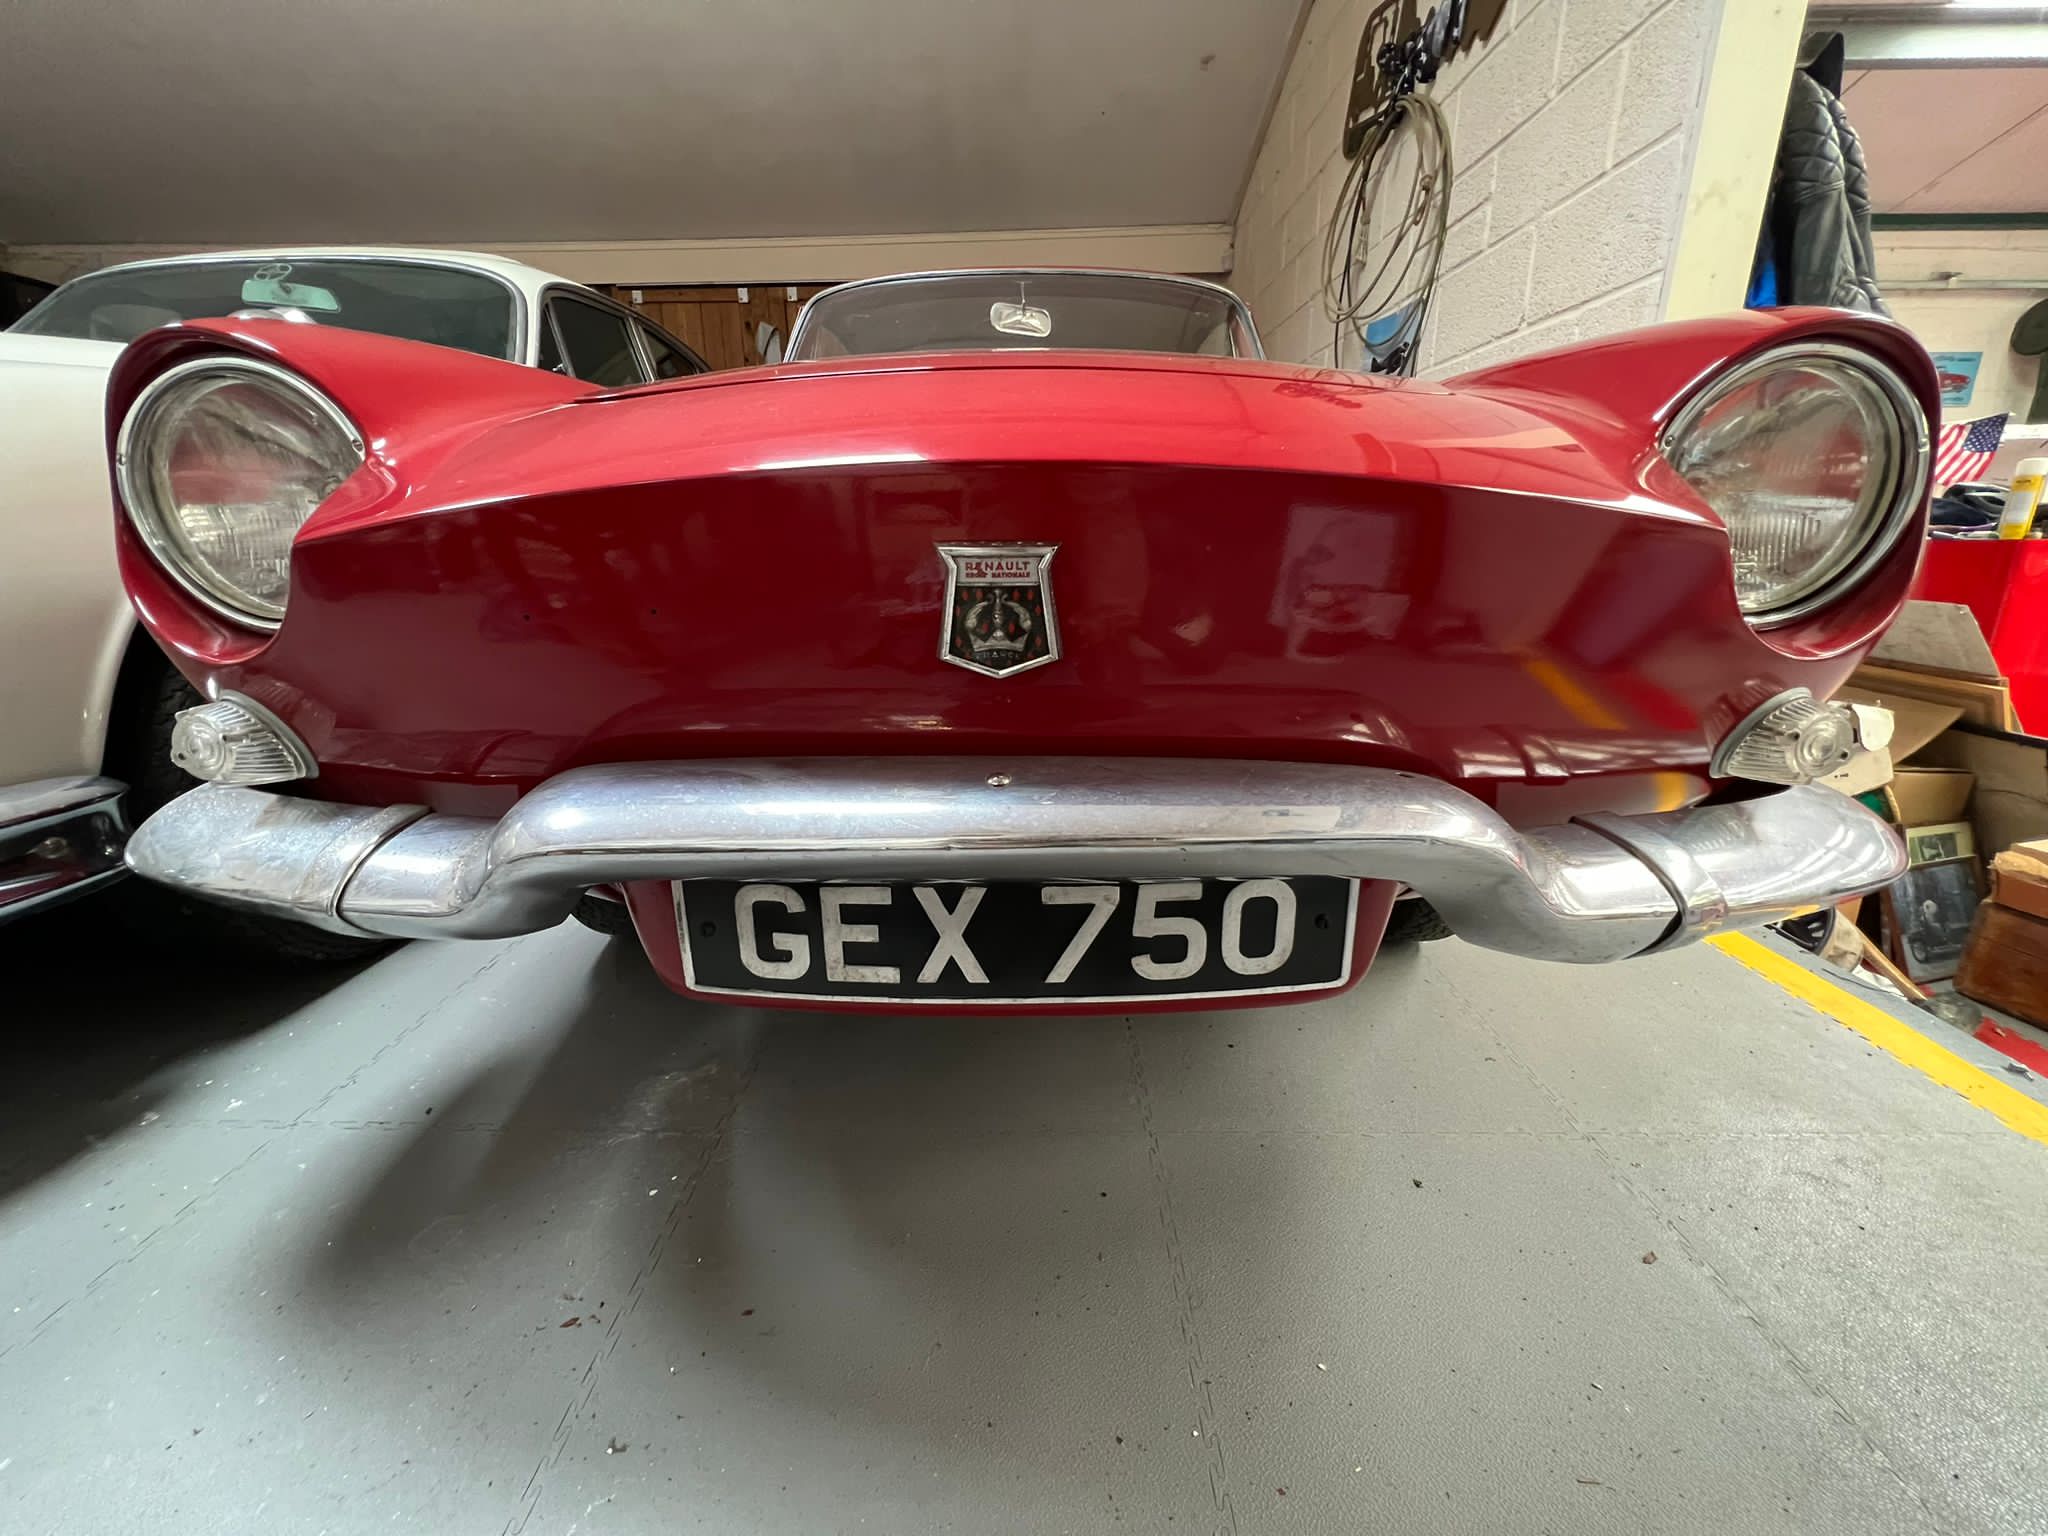 Renault Floride Coupe 1962 - Image 10 of 18